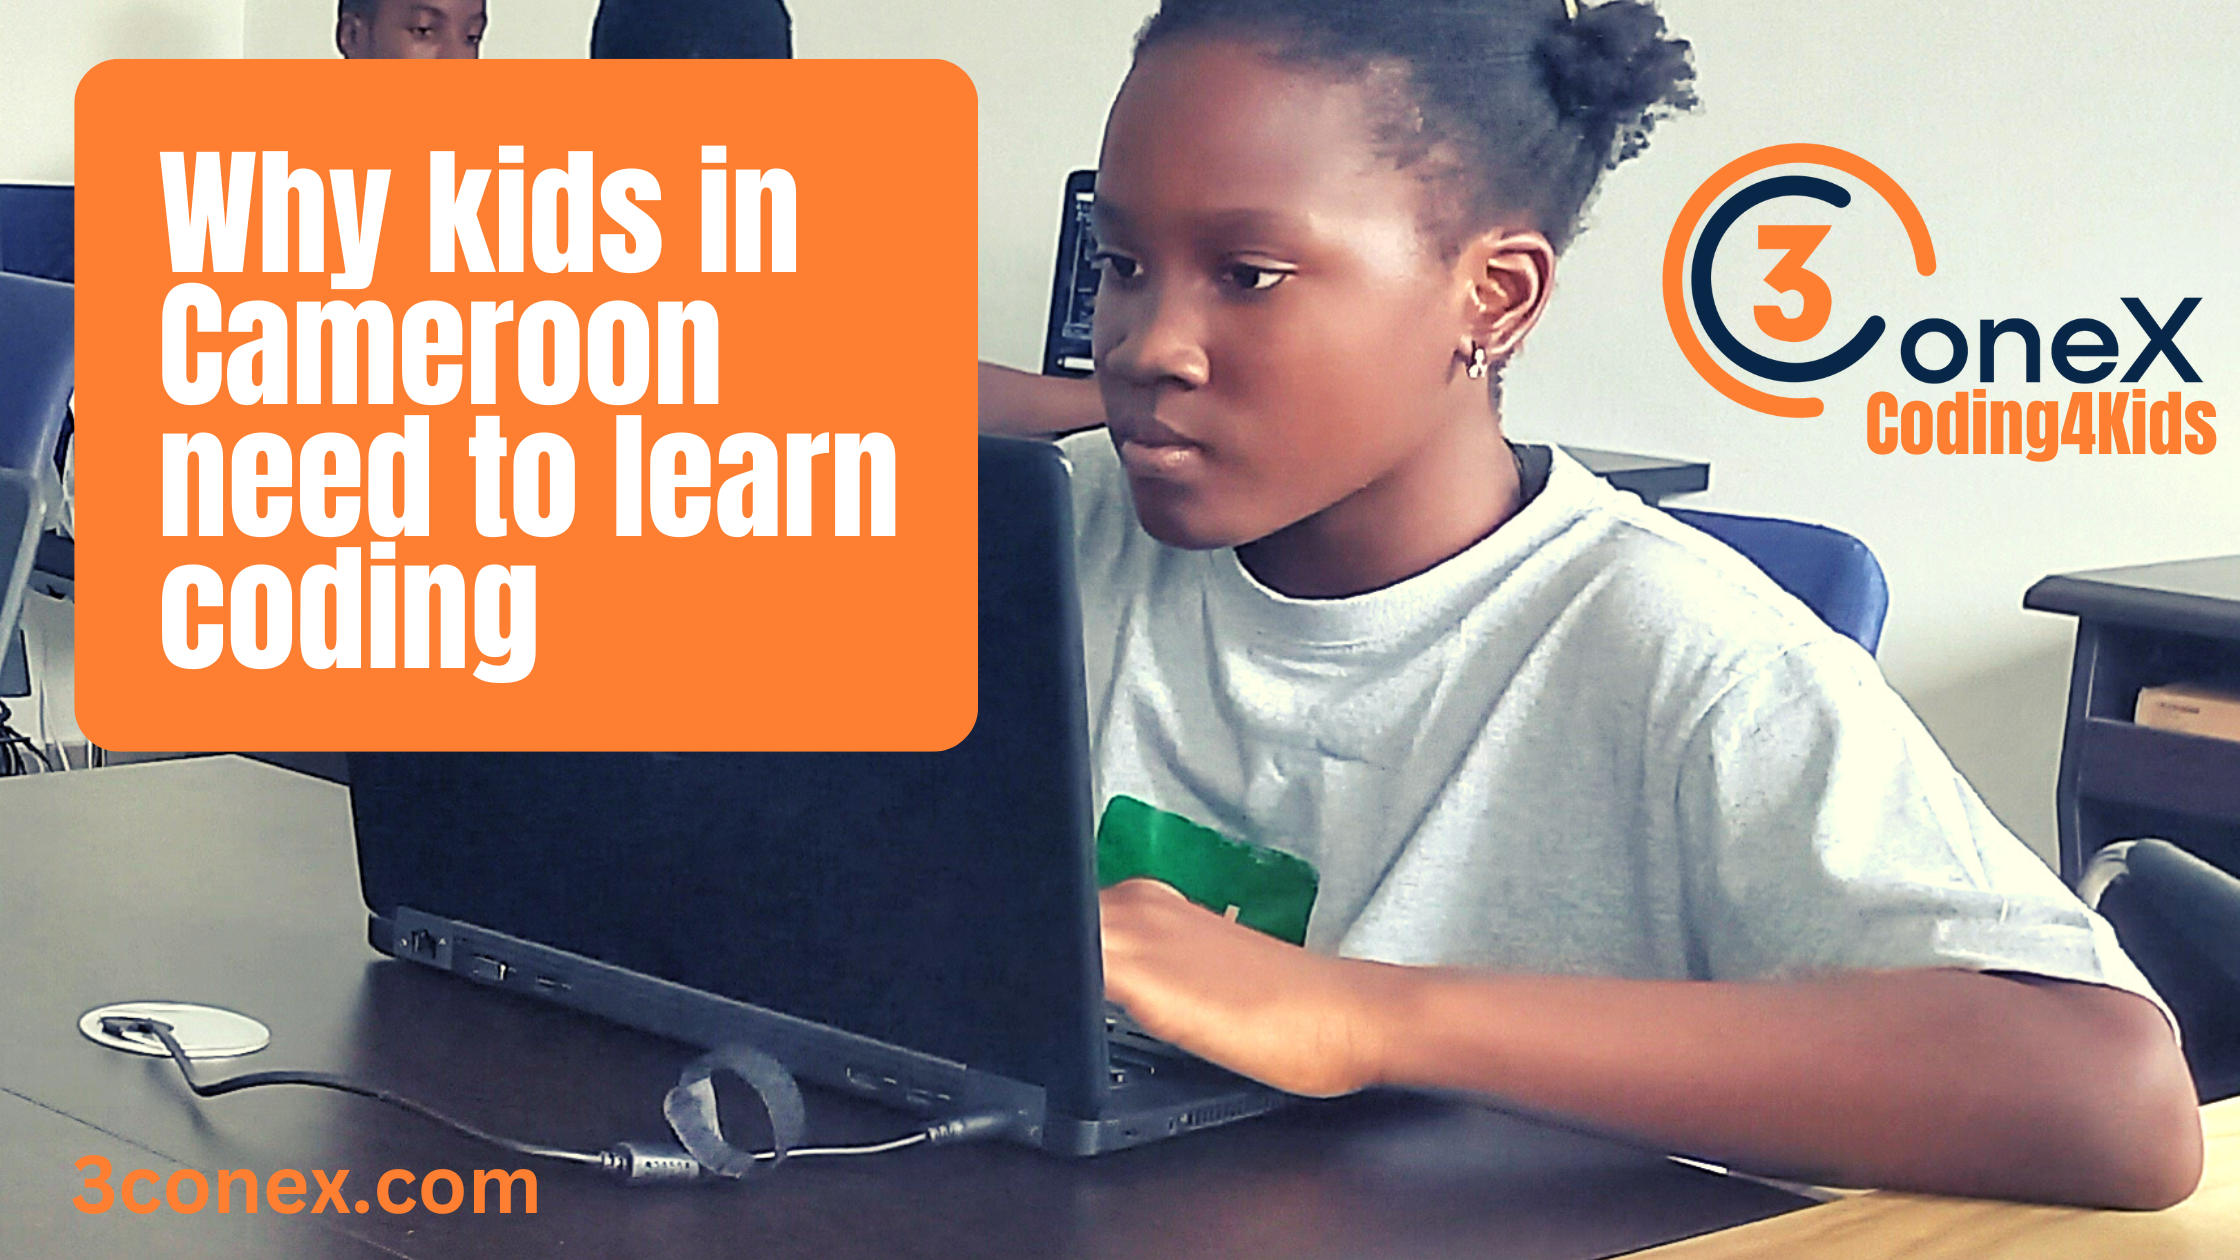 Learn to Code - Coding4Kids by 3Conex.com